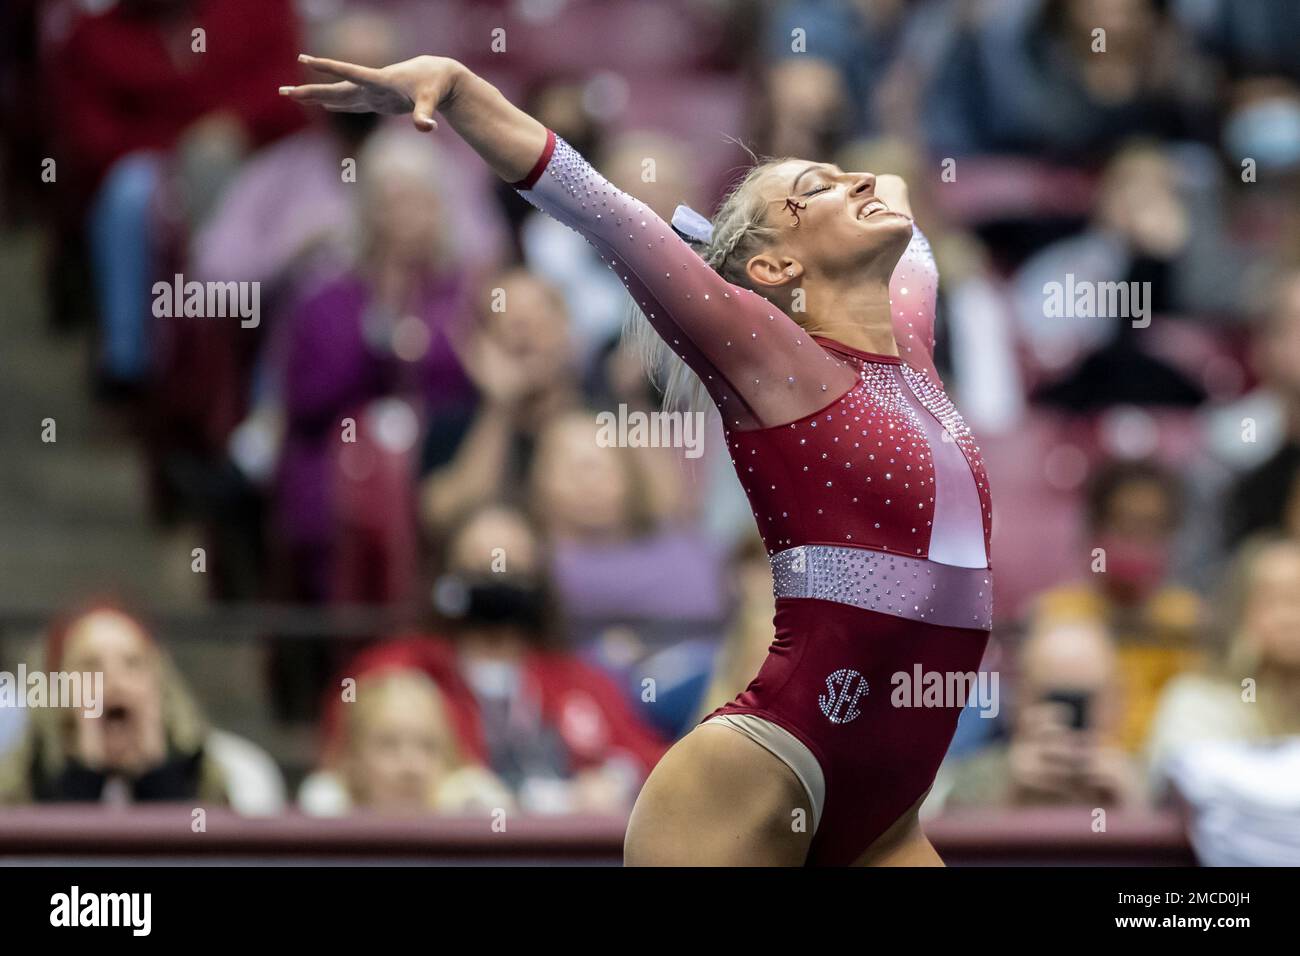 Alabama gymnast Lexi Graber competes on the floor during an NCAA ...